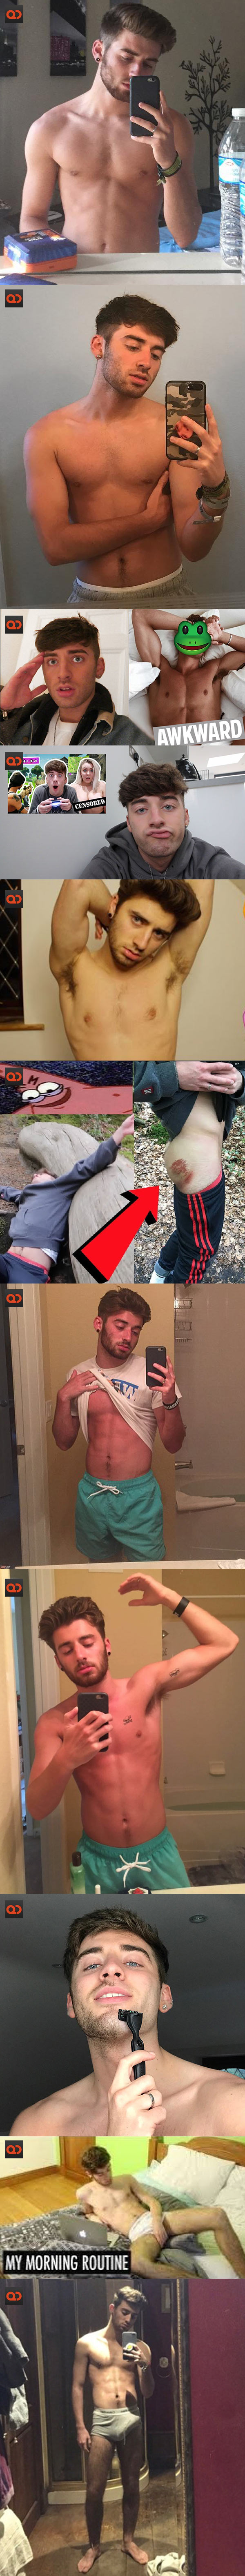 Carmine Sellitto, YouTube Star “Touchdalight”, Exposed His Cock In Leaked Snaps!